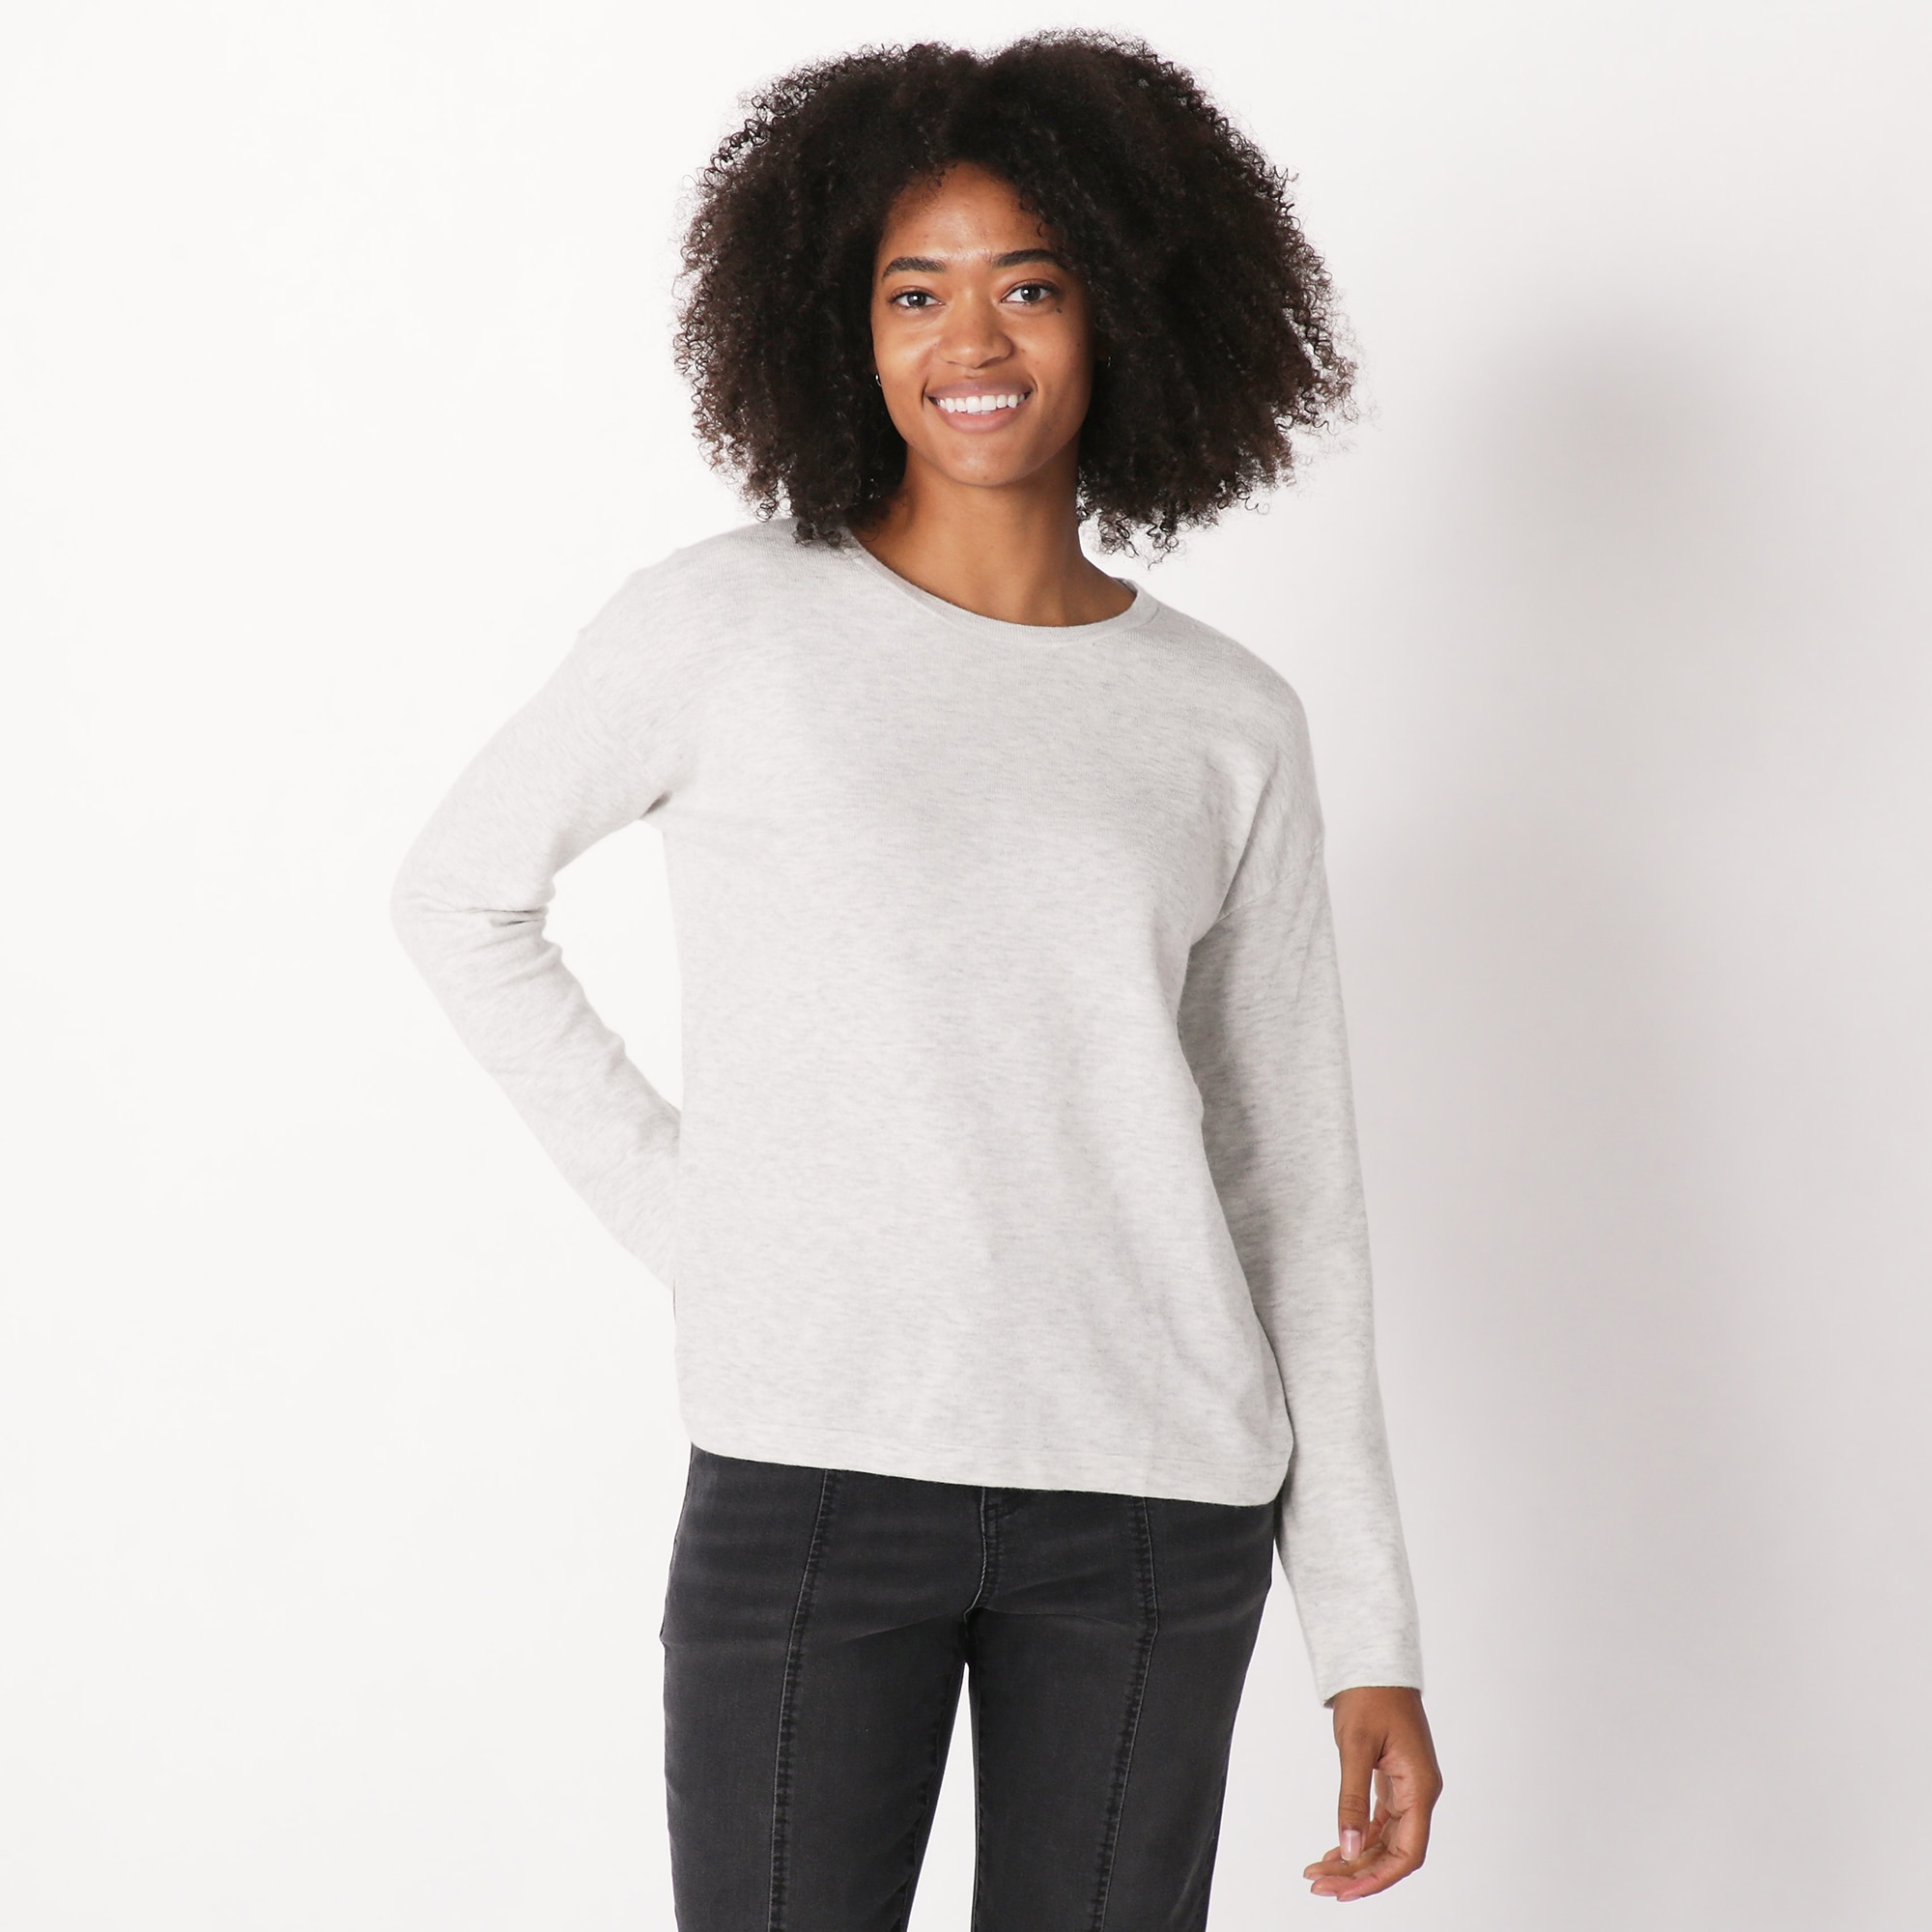 Clothing & Shoes - Tops - Sweaters & Cardigans - Pullovers - Wynne